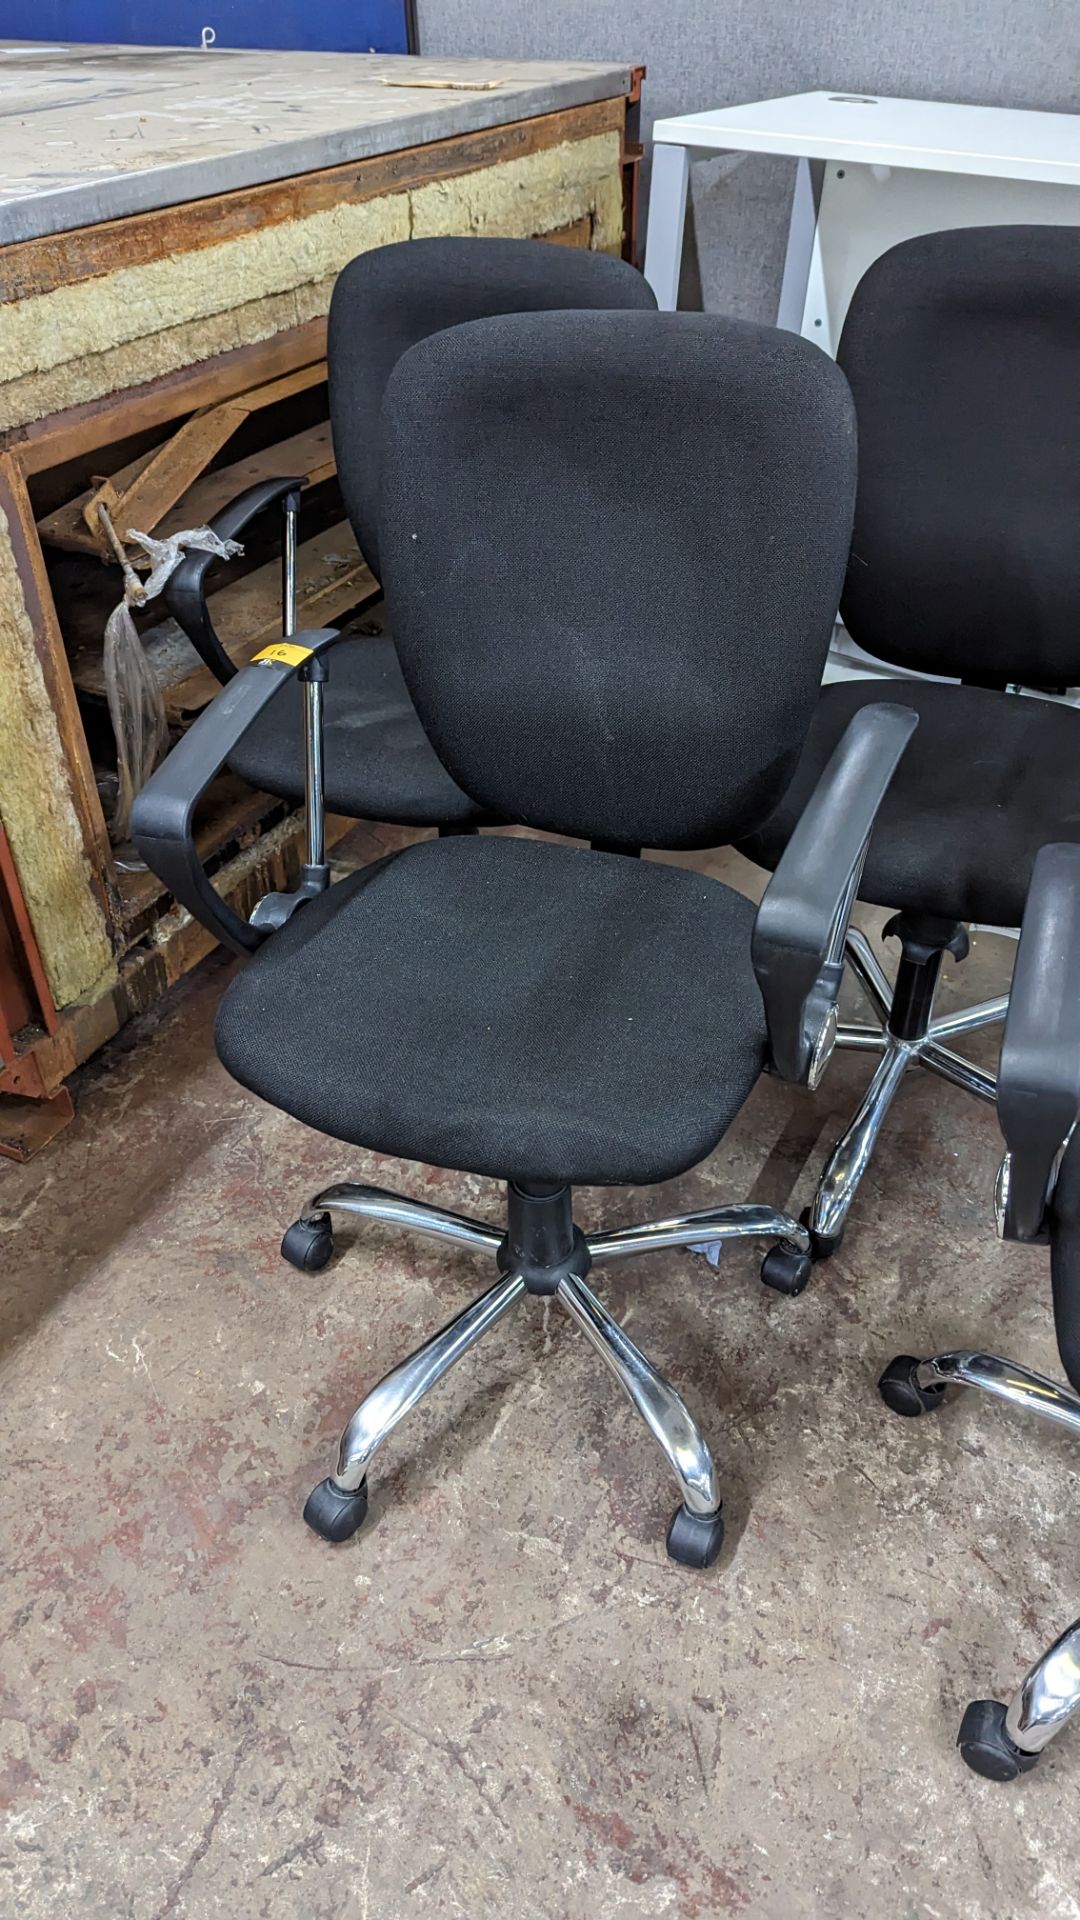 6 off matching chairs with arms - Image 3 of 6